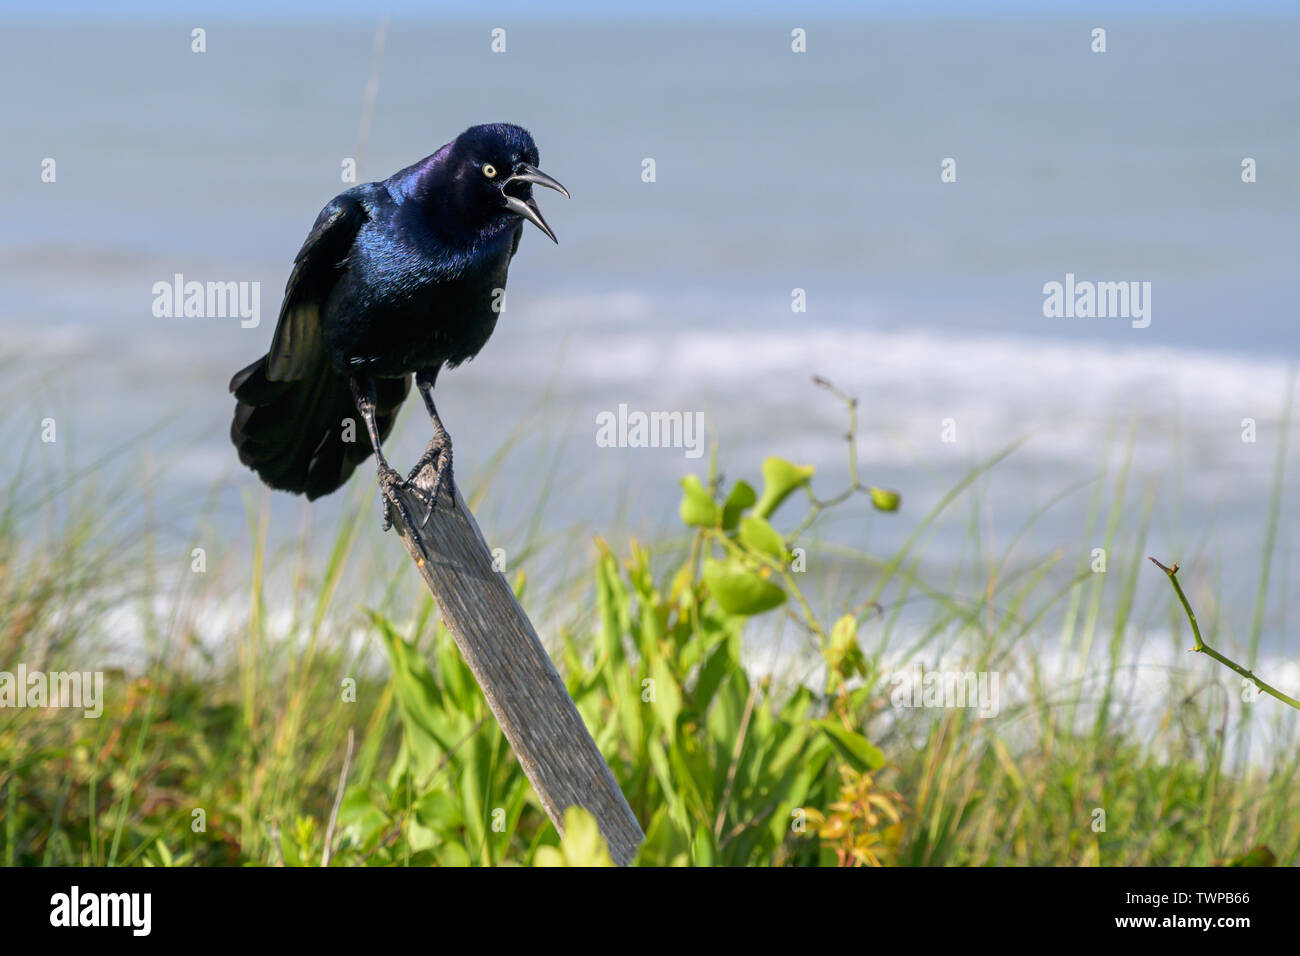 A boat-tailed grackle balances on a wooden post glaring with his beack open. Stock Photo